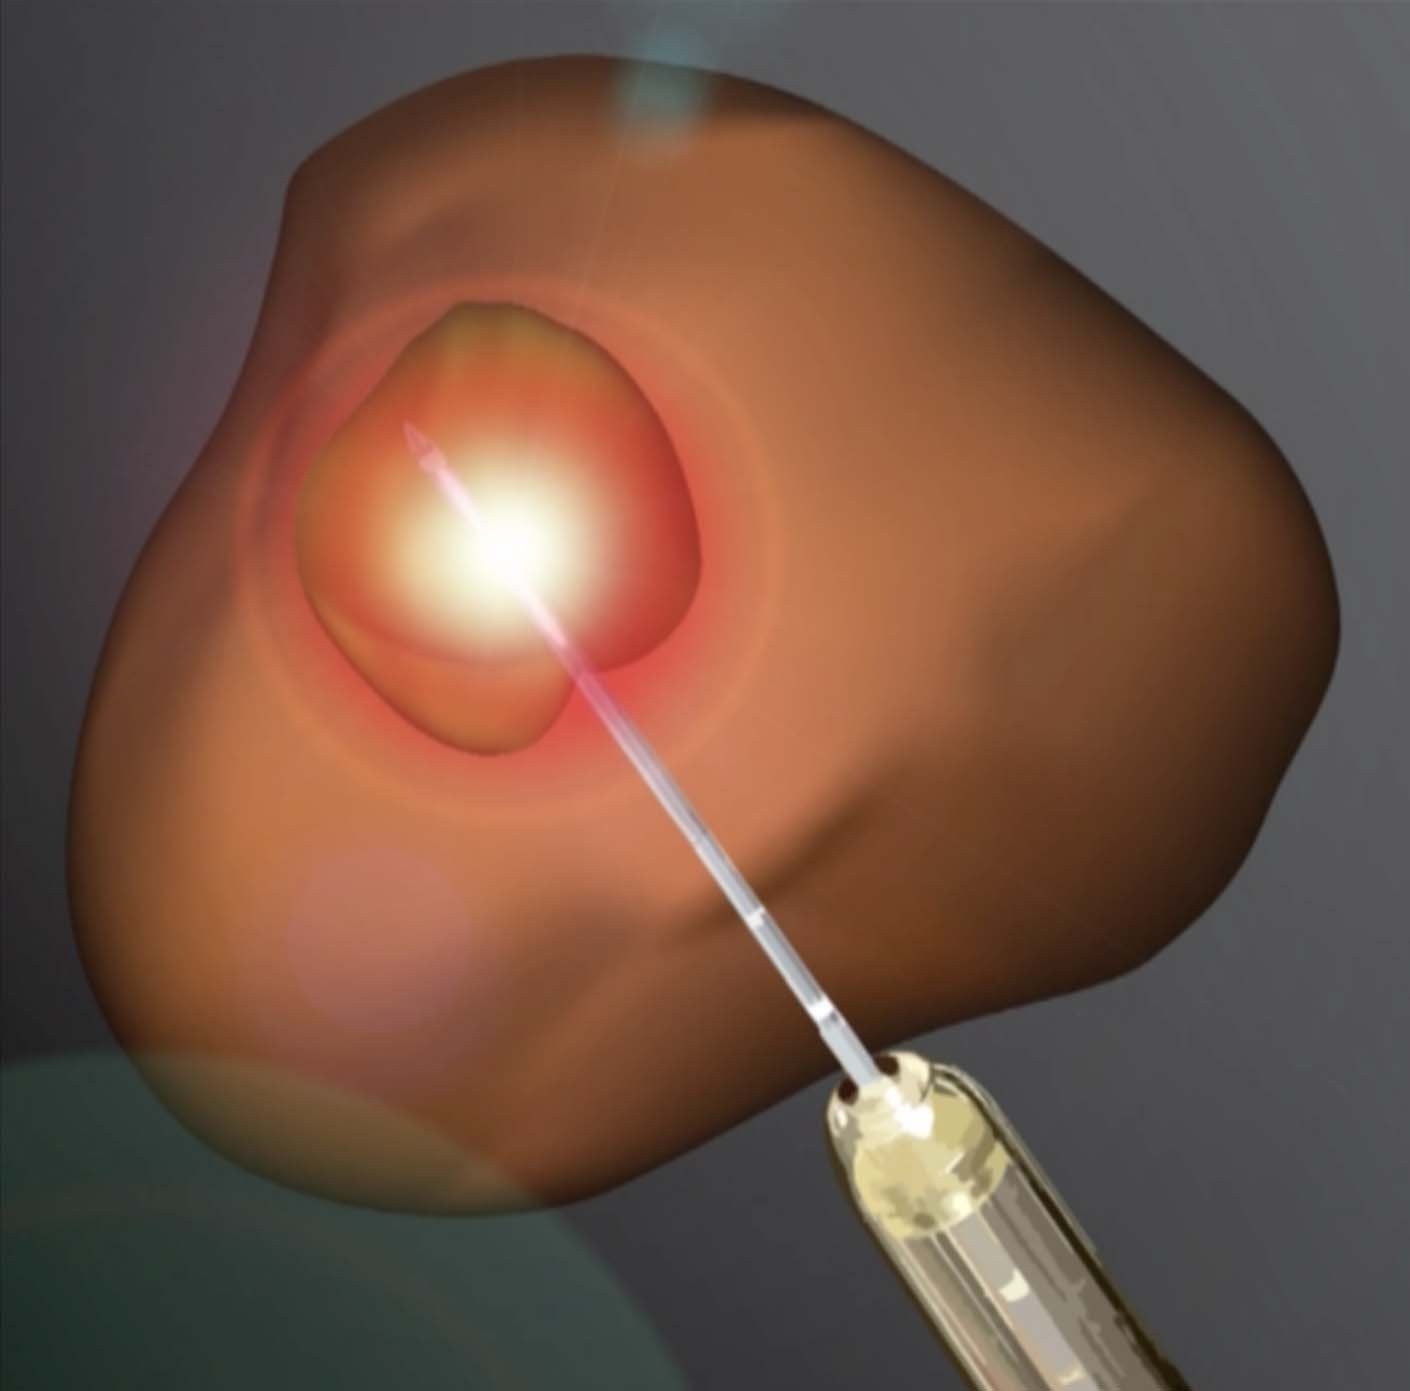 Laser ablation becomes increasingly viable treatment for prostate cancer